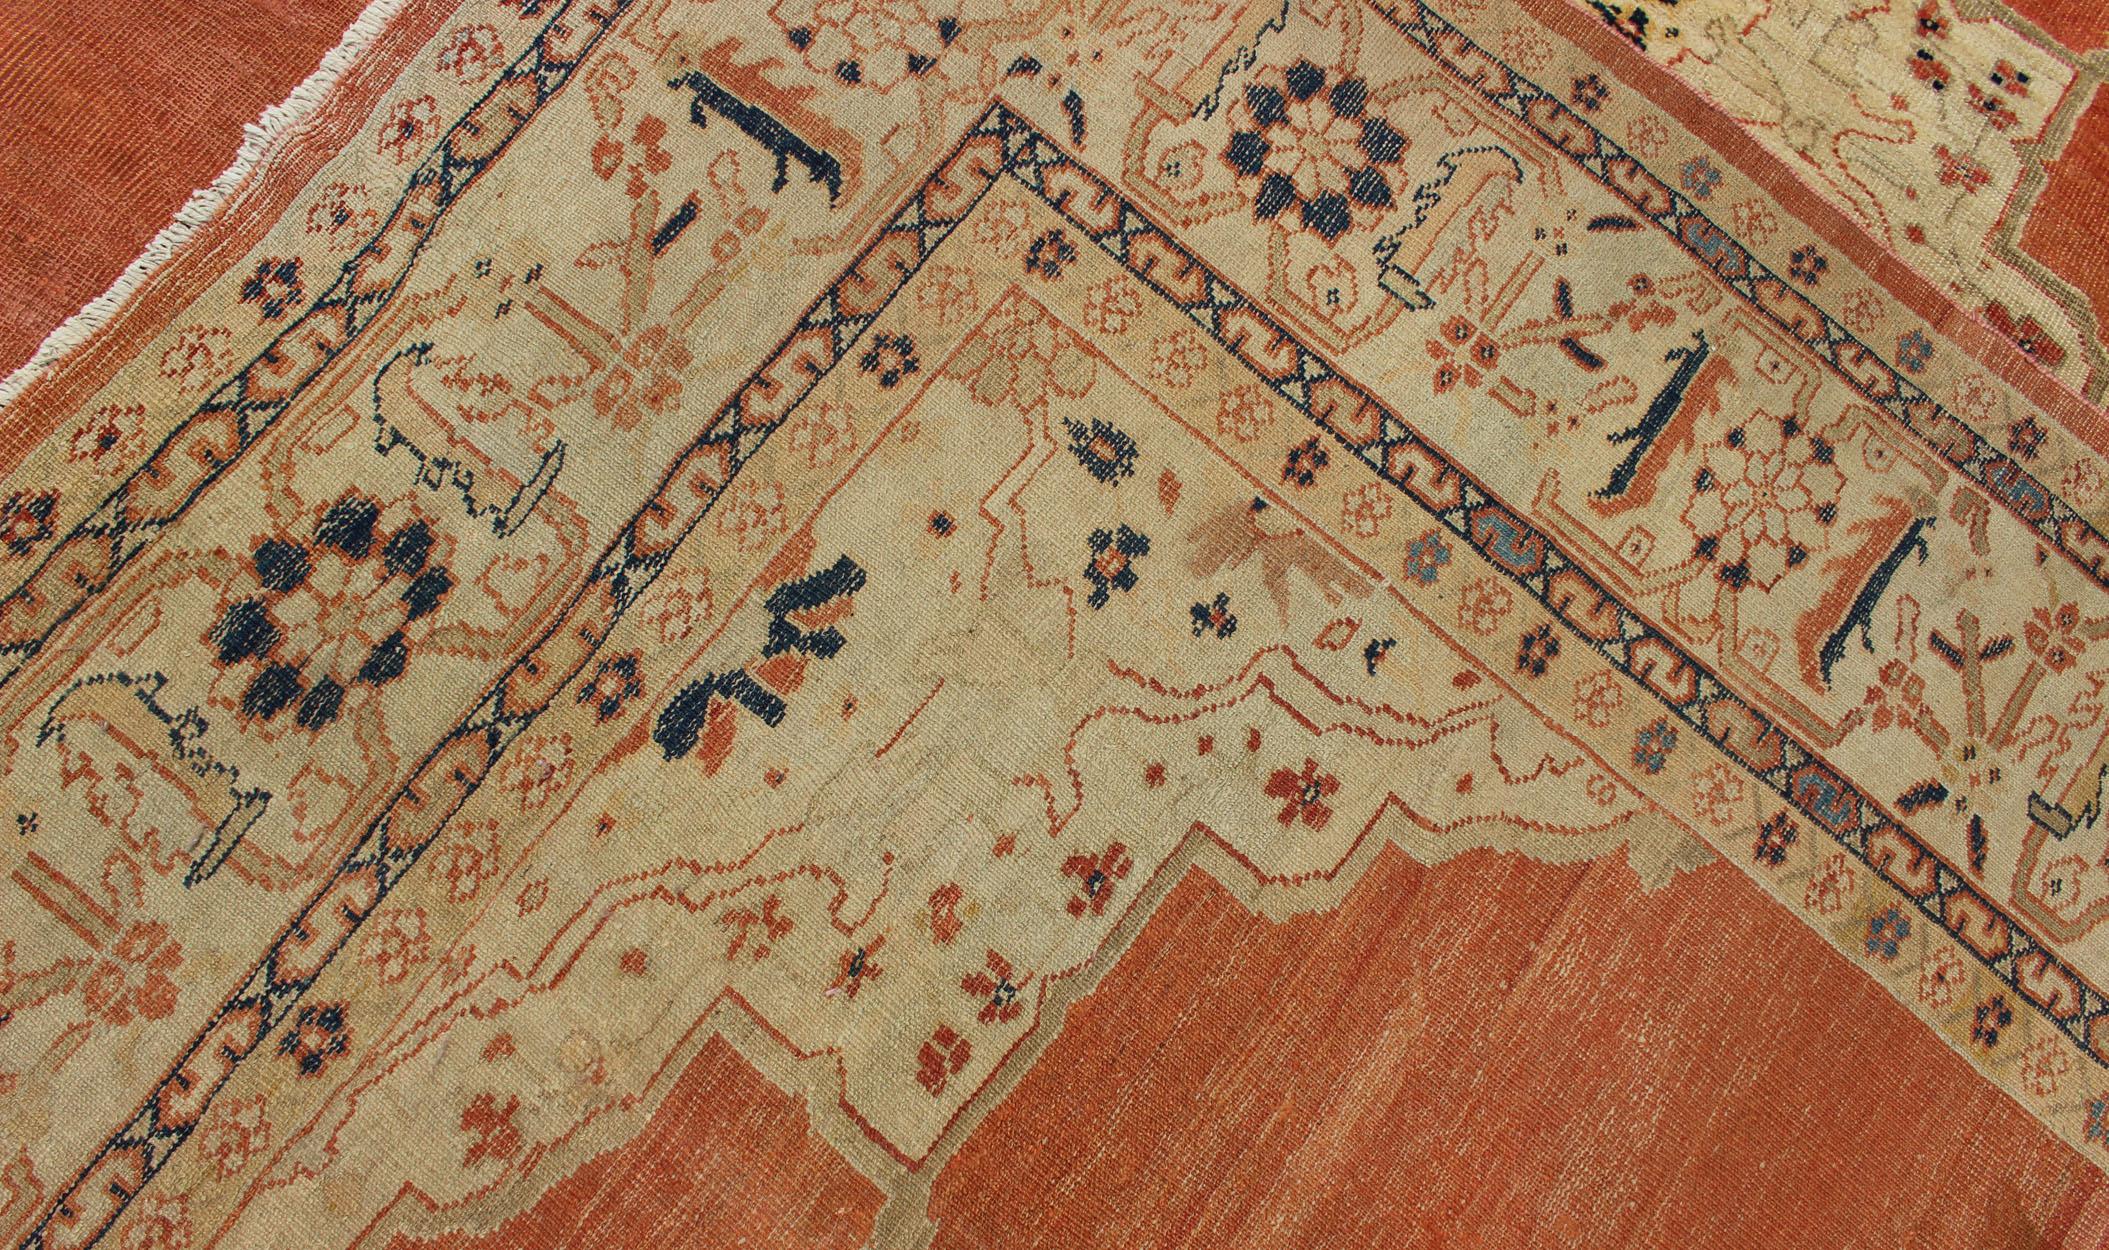 Antique Large Ziegler Sultanabad Rug in Soft Orange, Cream and Navy Blue In Good Condition For Sale In Atlanta, GA